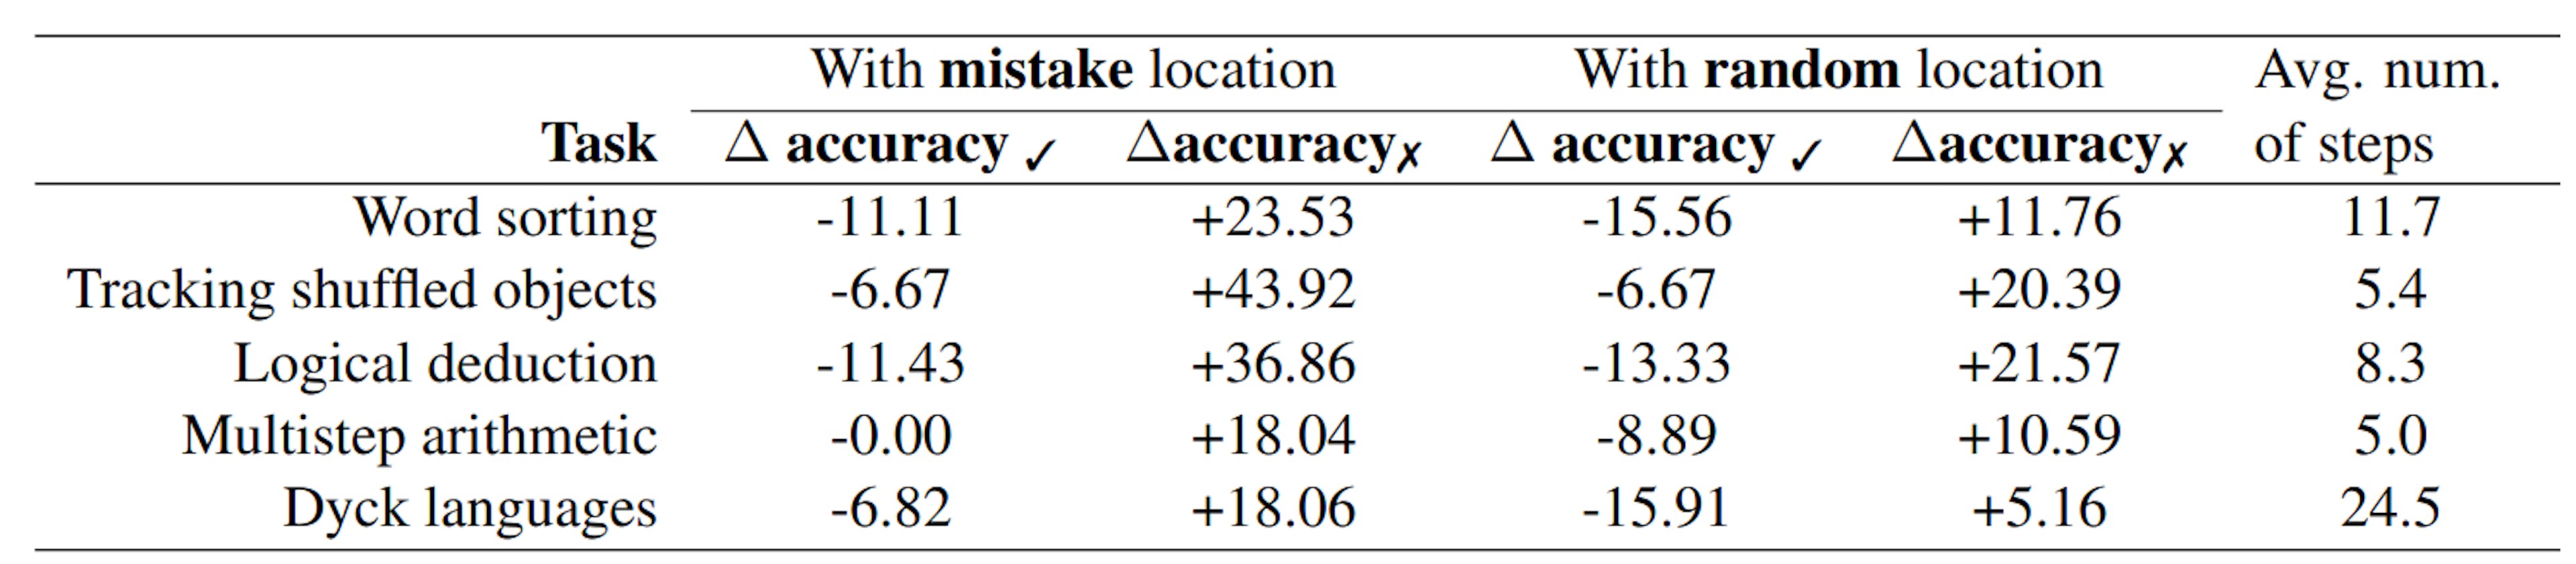 Table 6: Absolute differences in accuracyans before and after backtracking. "With mistake location" indicates that backtracking was done using oracle mistake locations from the dataset; "With random location" indicates that backtracking was done based on randomly selected locations. ∆accuracy✓ refers to differences in accuracyans on the set of traces whose original answer was correctans; ∆accuracy✗ for traces whose original answer was incorrectans. The average number of steps in a trace is shown to demonstrate the likelihood of randomly selecting the correct mistake location in the random baseline condition.